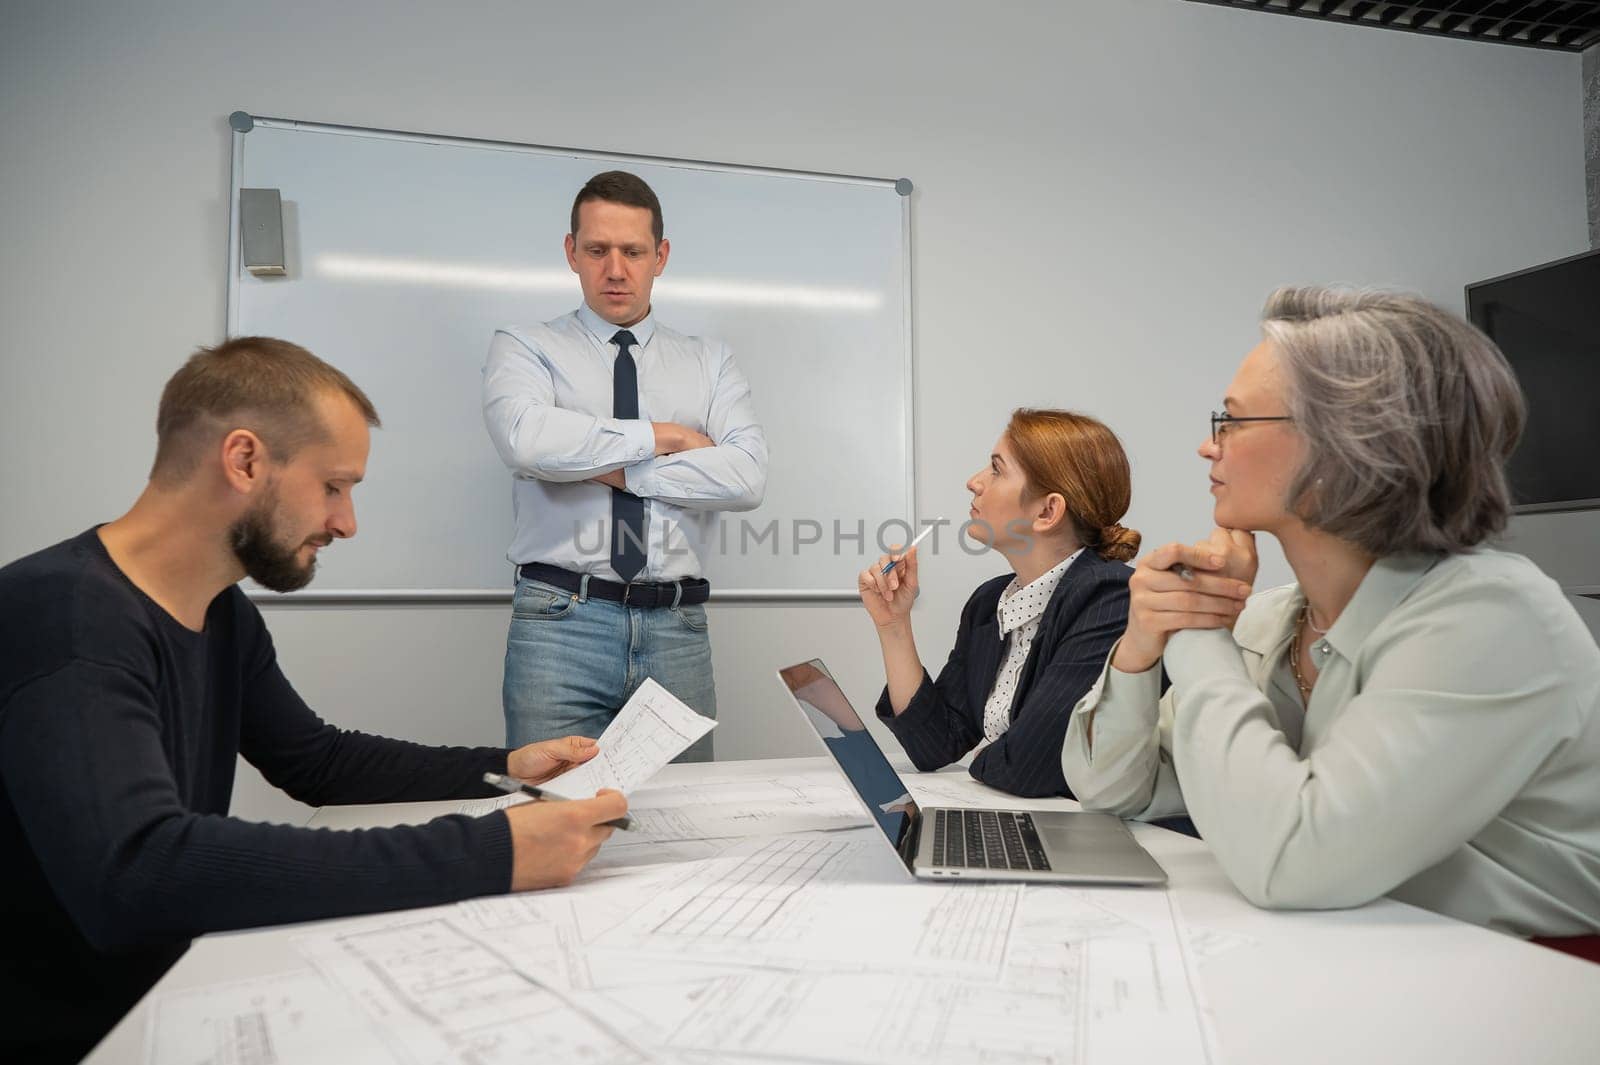 Caucasian man leading a presentation to colleagues at a white board